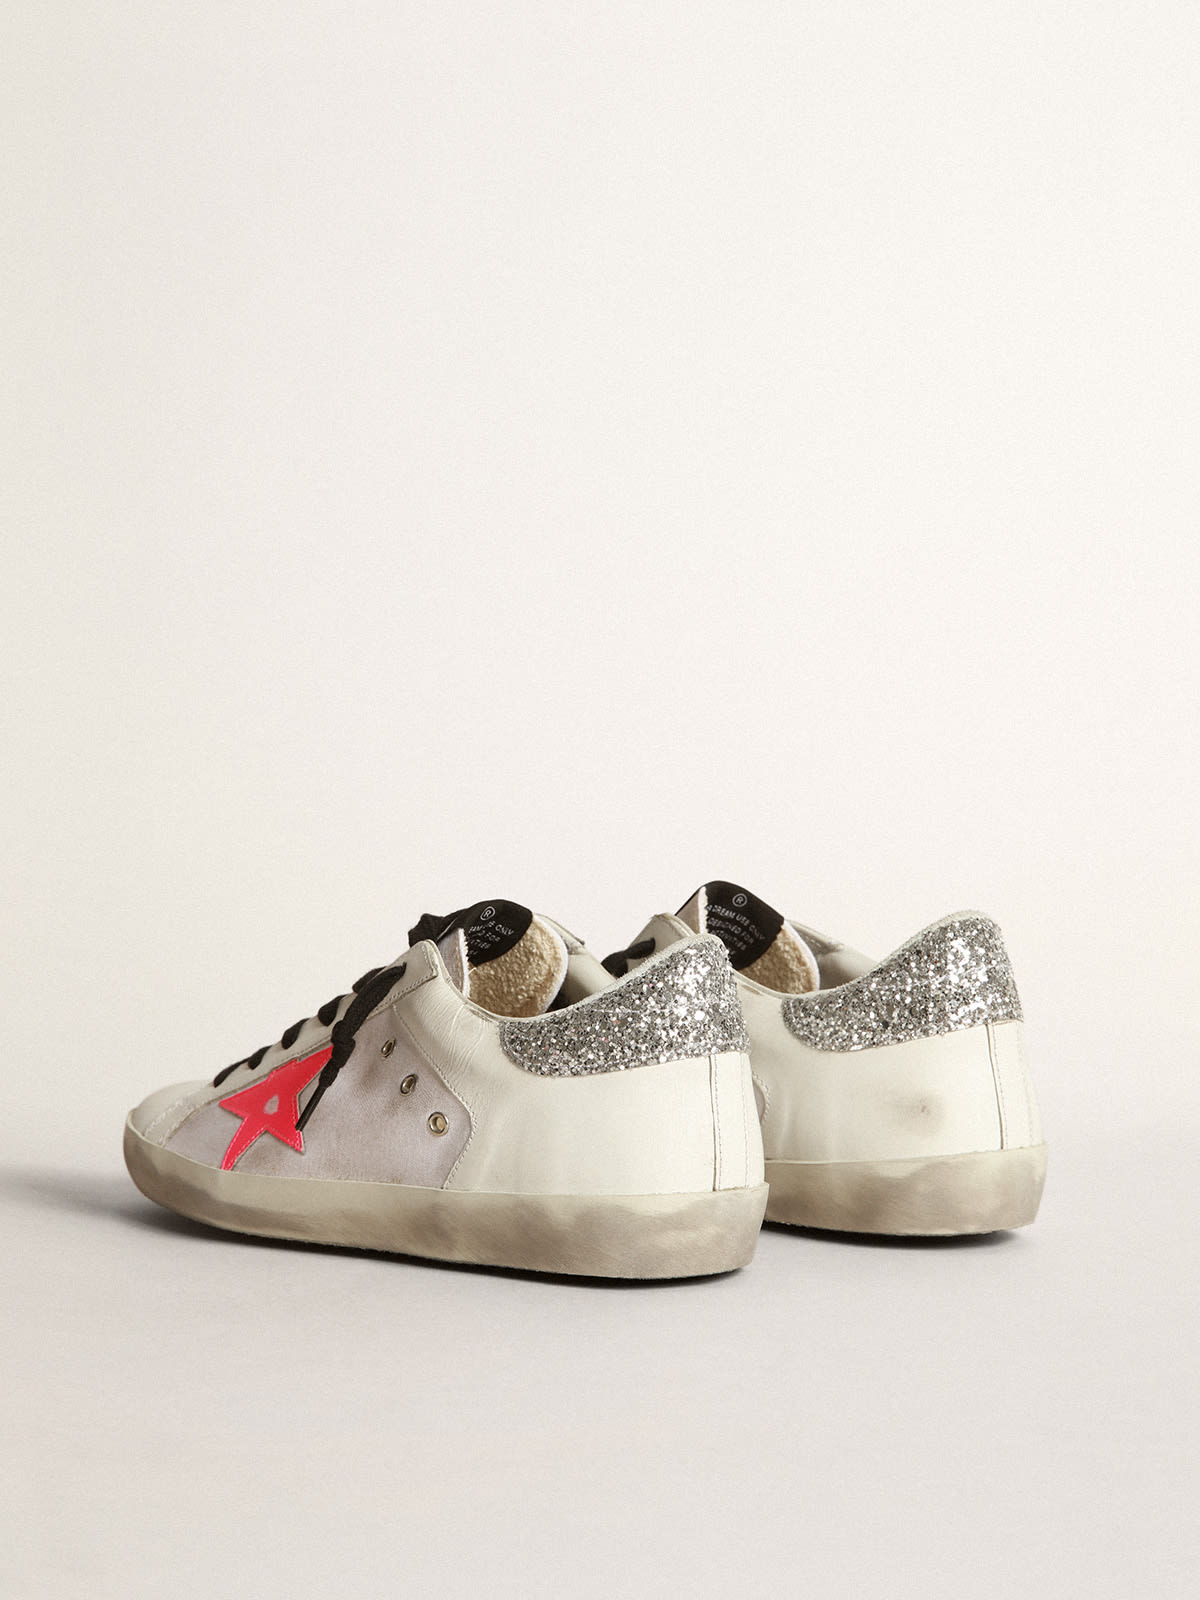 Golden Goose - Super-Star sneakers in white leather and canvas with shocking-pink leather star and silver glitter heel tab in 